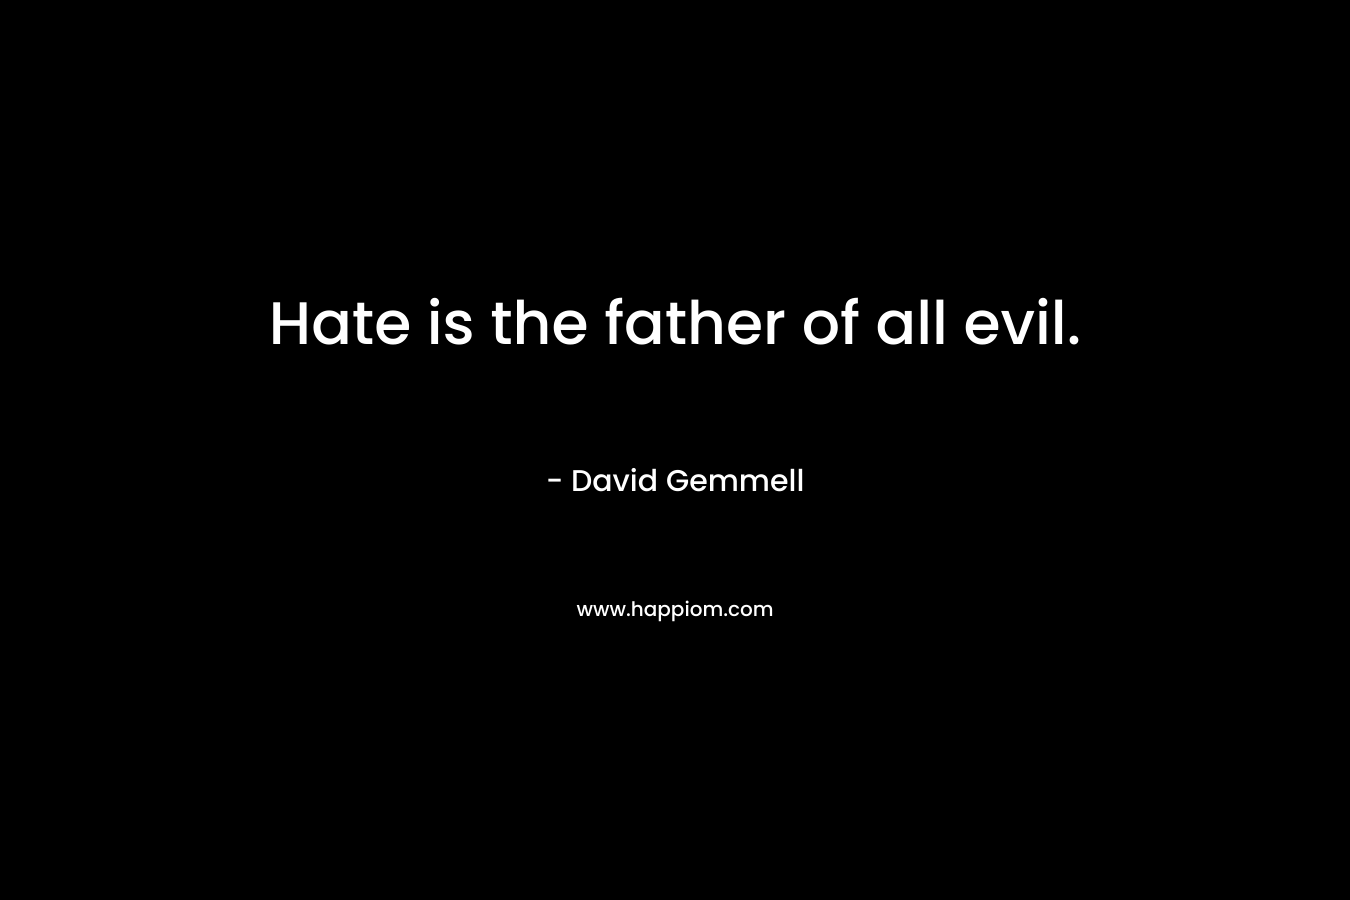 Hate is the father of all evil.